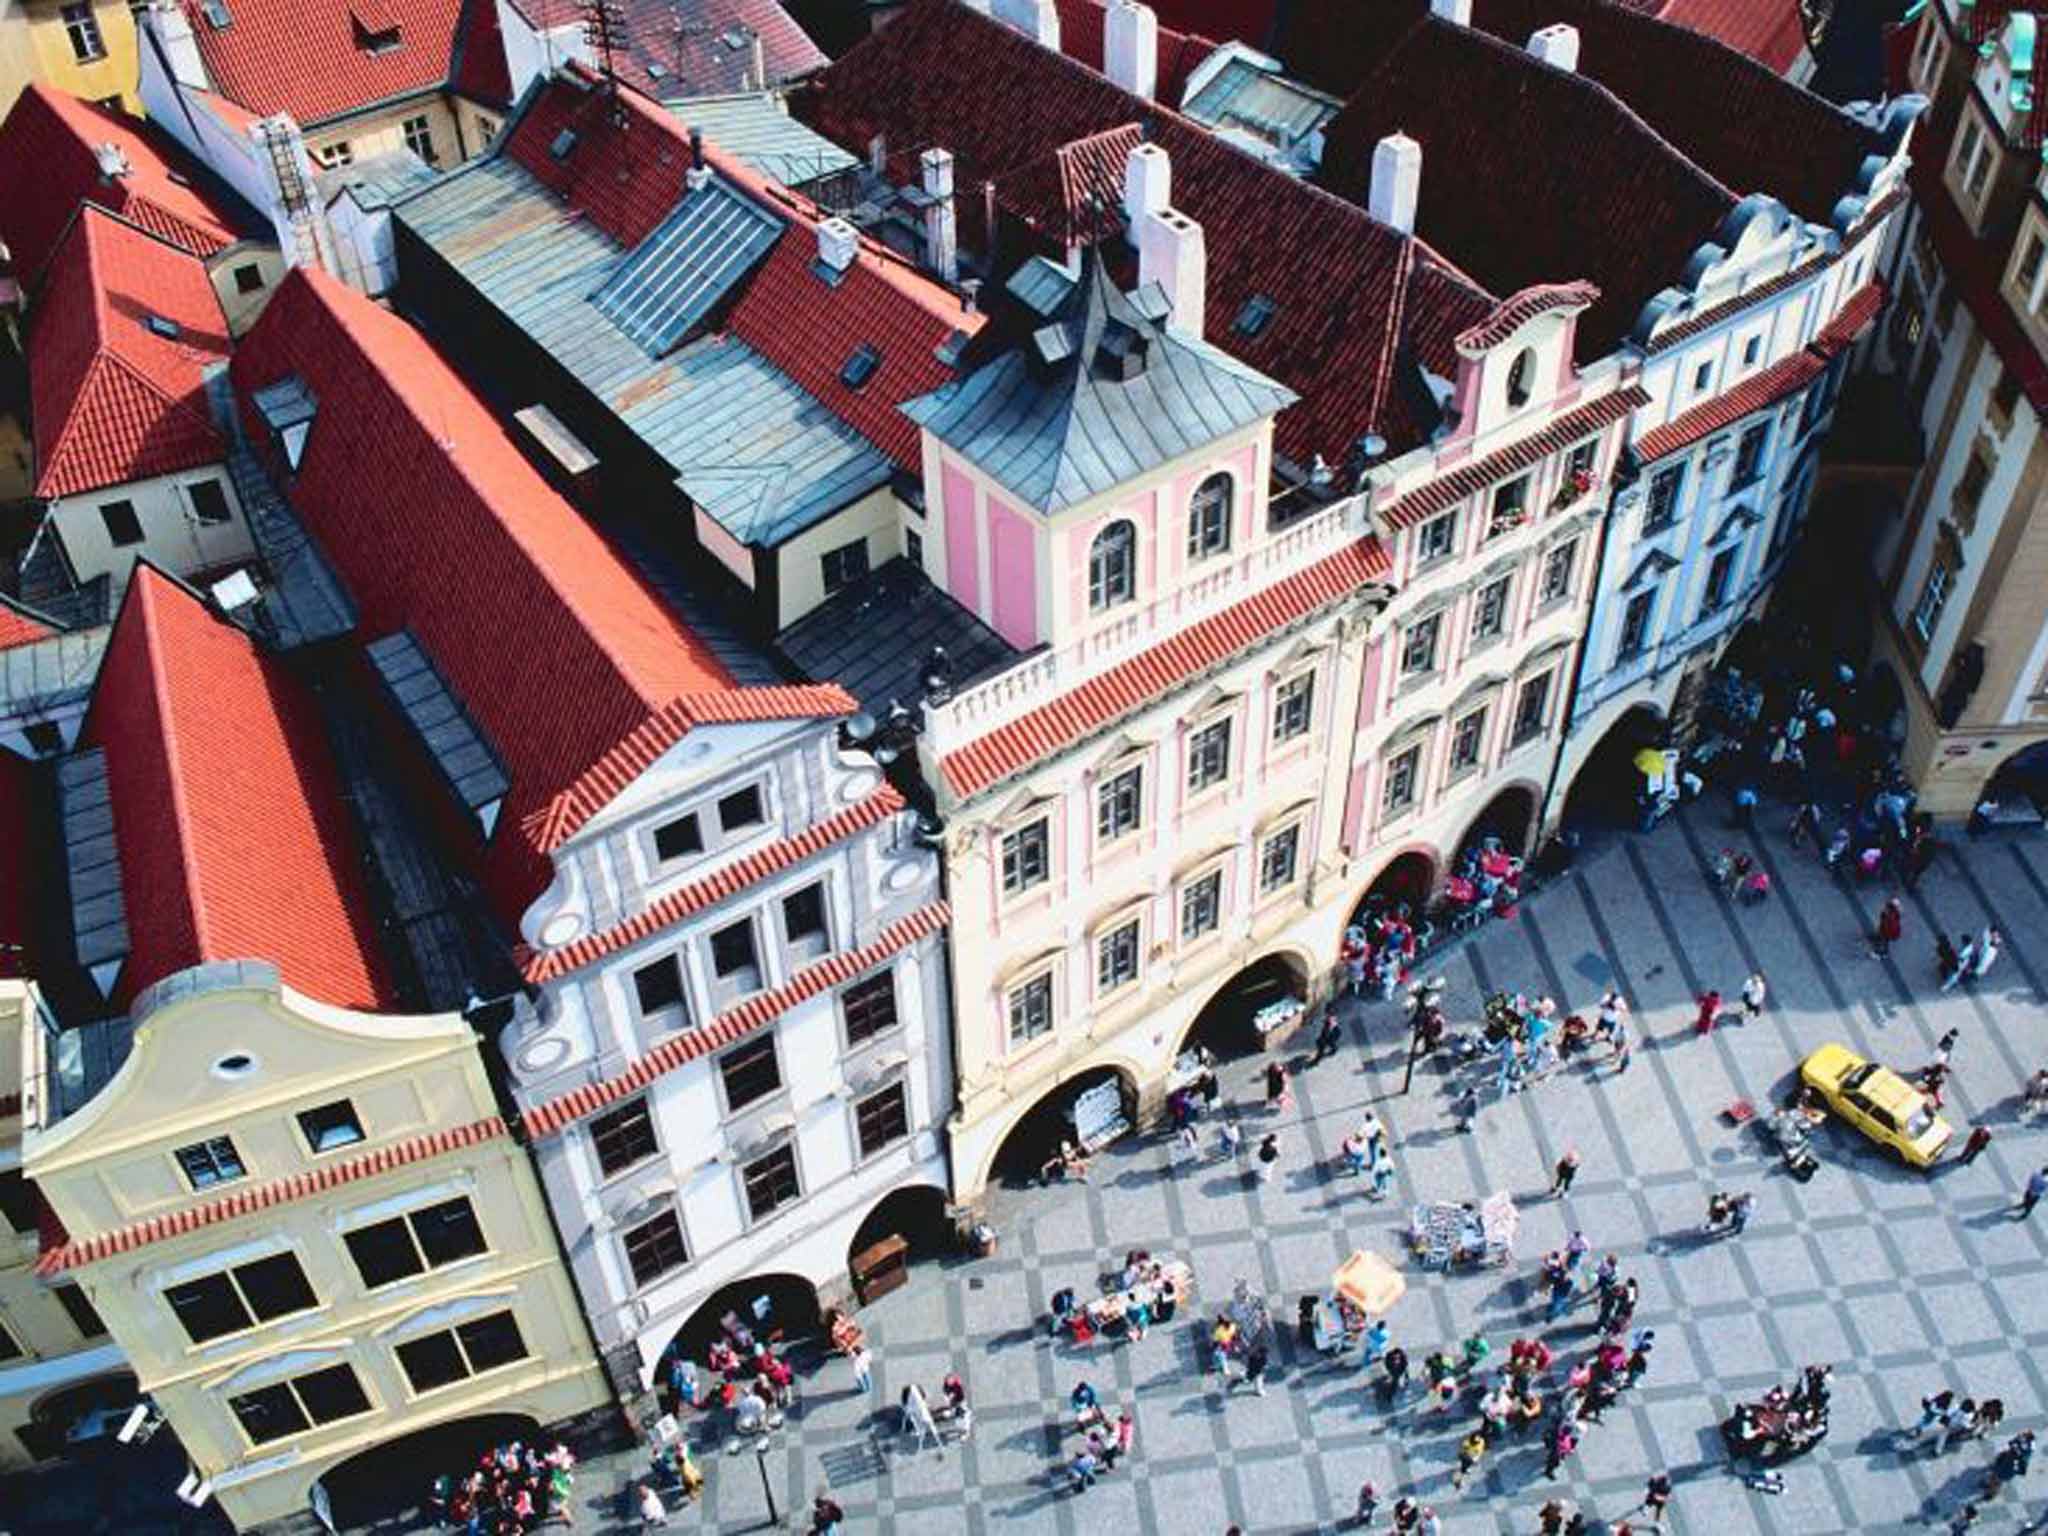 Prague will now be the capital city of Czechia